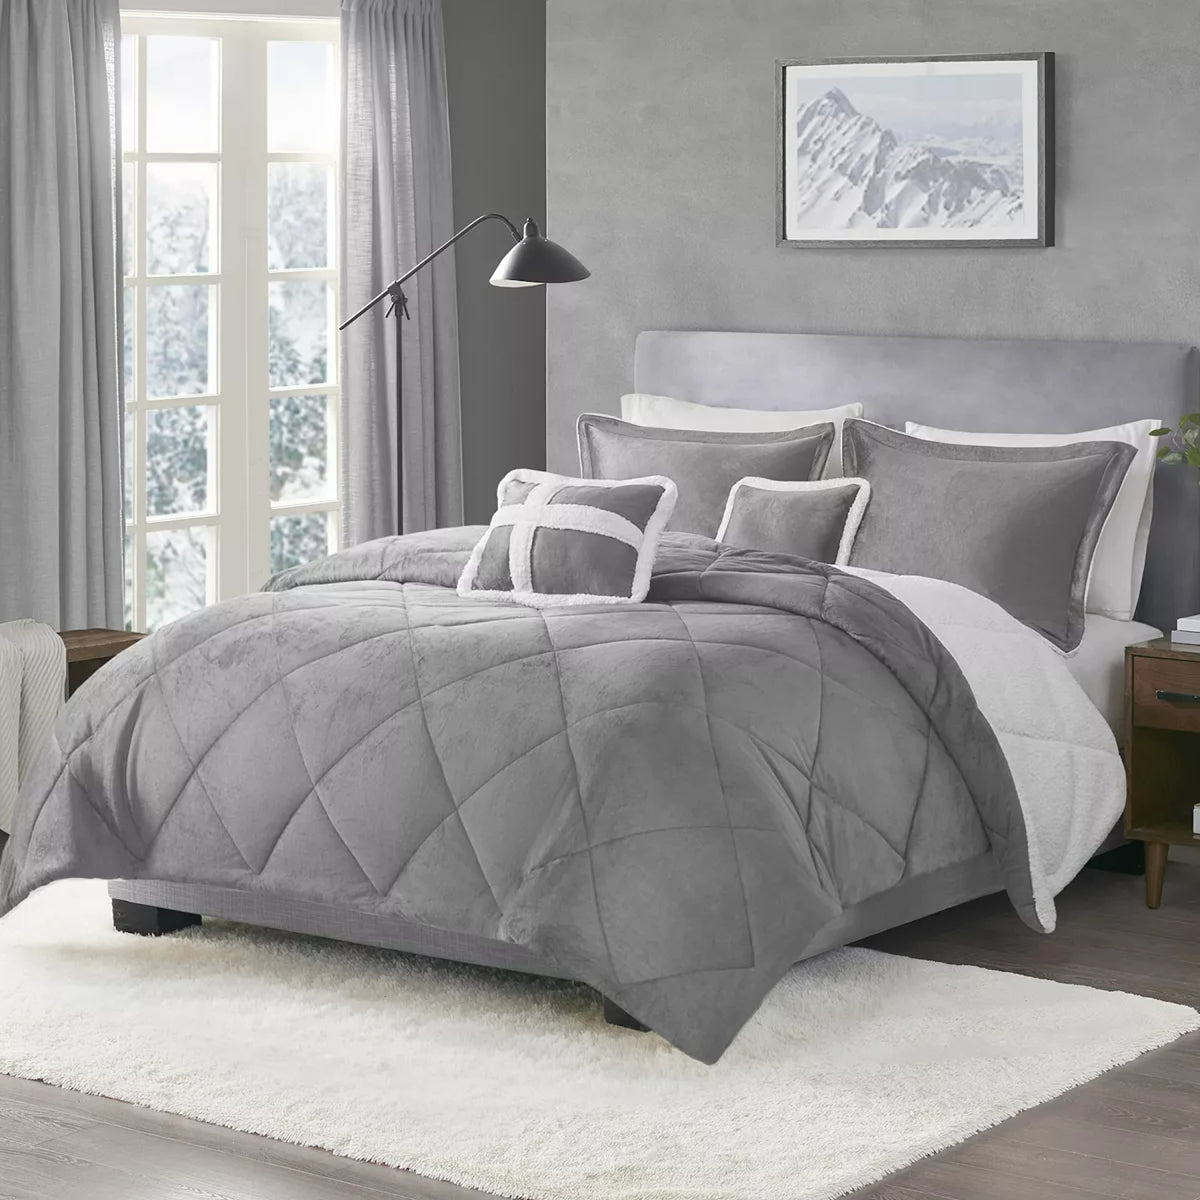 True North Mink to Sherpa Comforter Set, Silver, King — Bid and Buy Deals